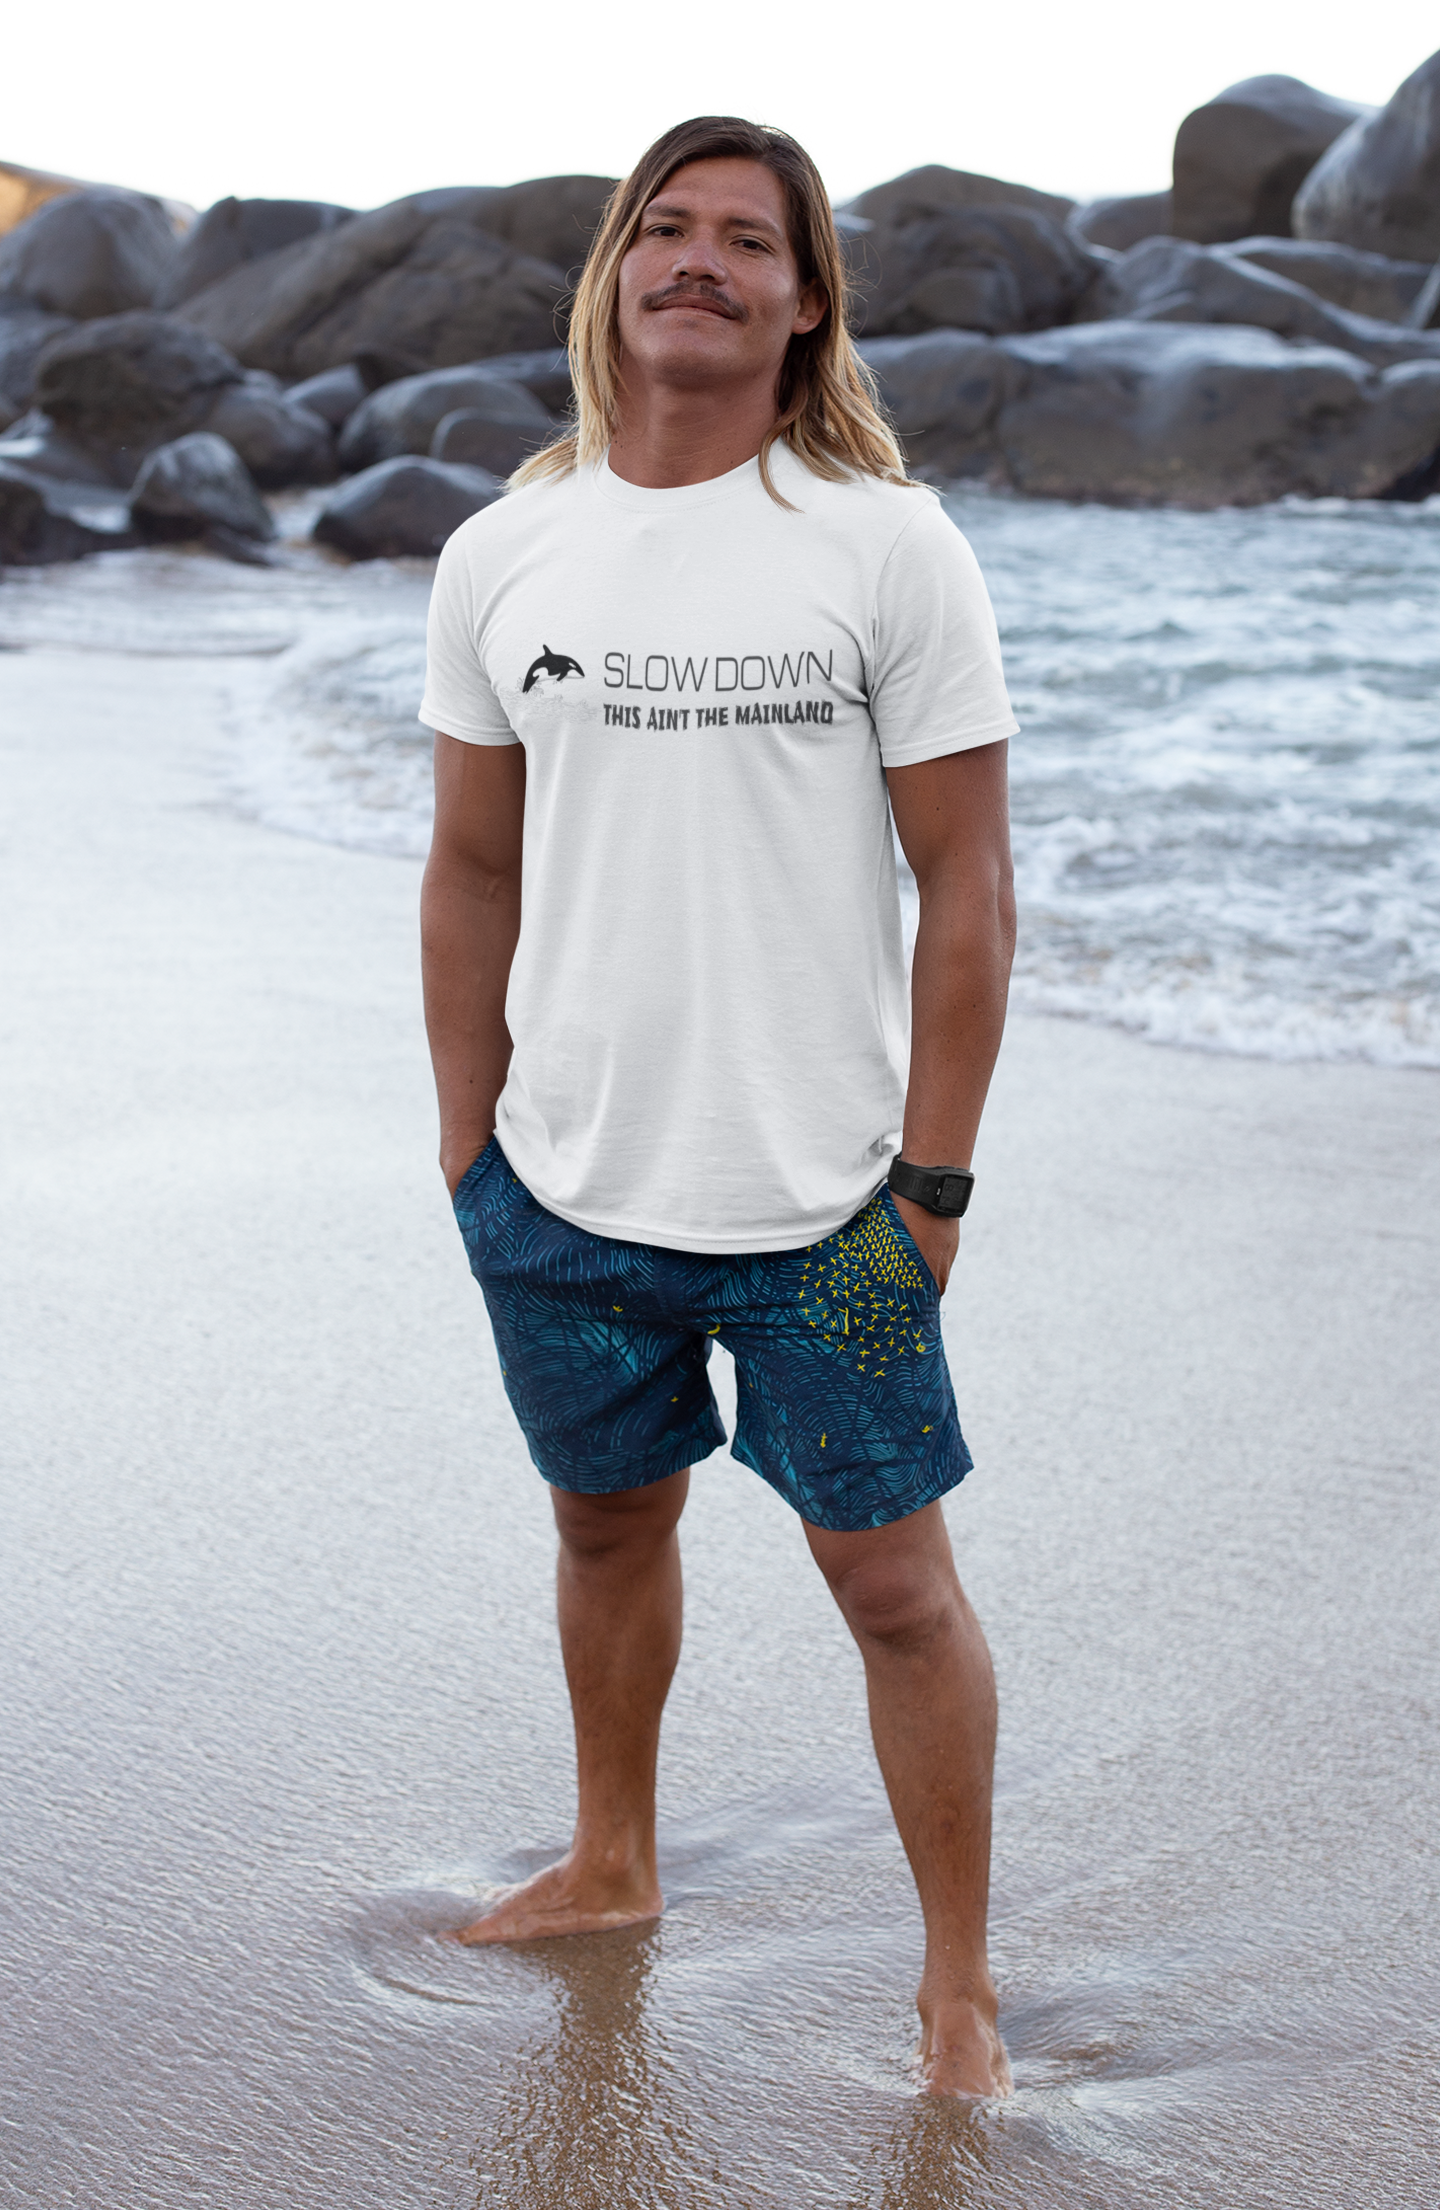 Slow Down This Ain't The Mainland Men's Orca Graphic Tee.